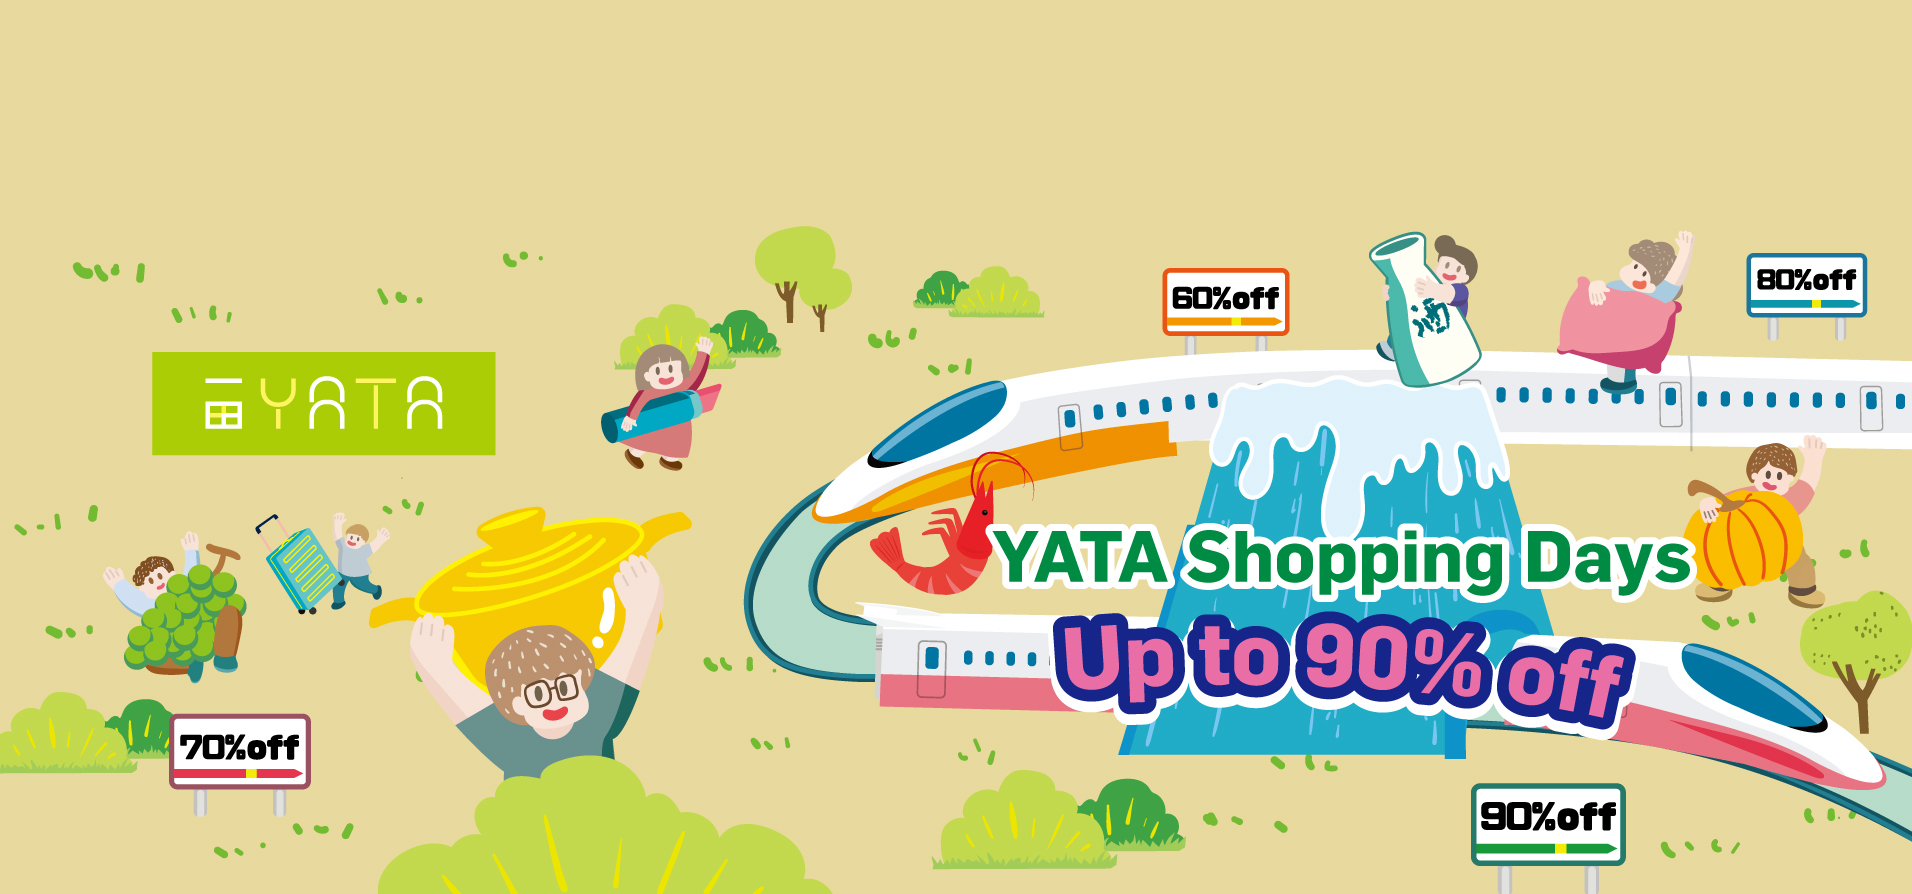 Hang Seng Credit Card Exclusive offers on YATA Shopping Days Get Cash Coupon and extra 5% off 23/11/2022 – 6/12/2022